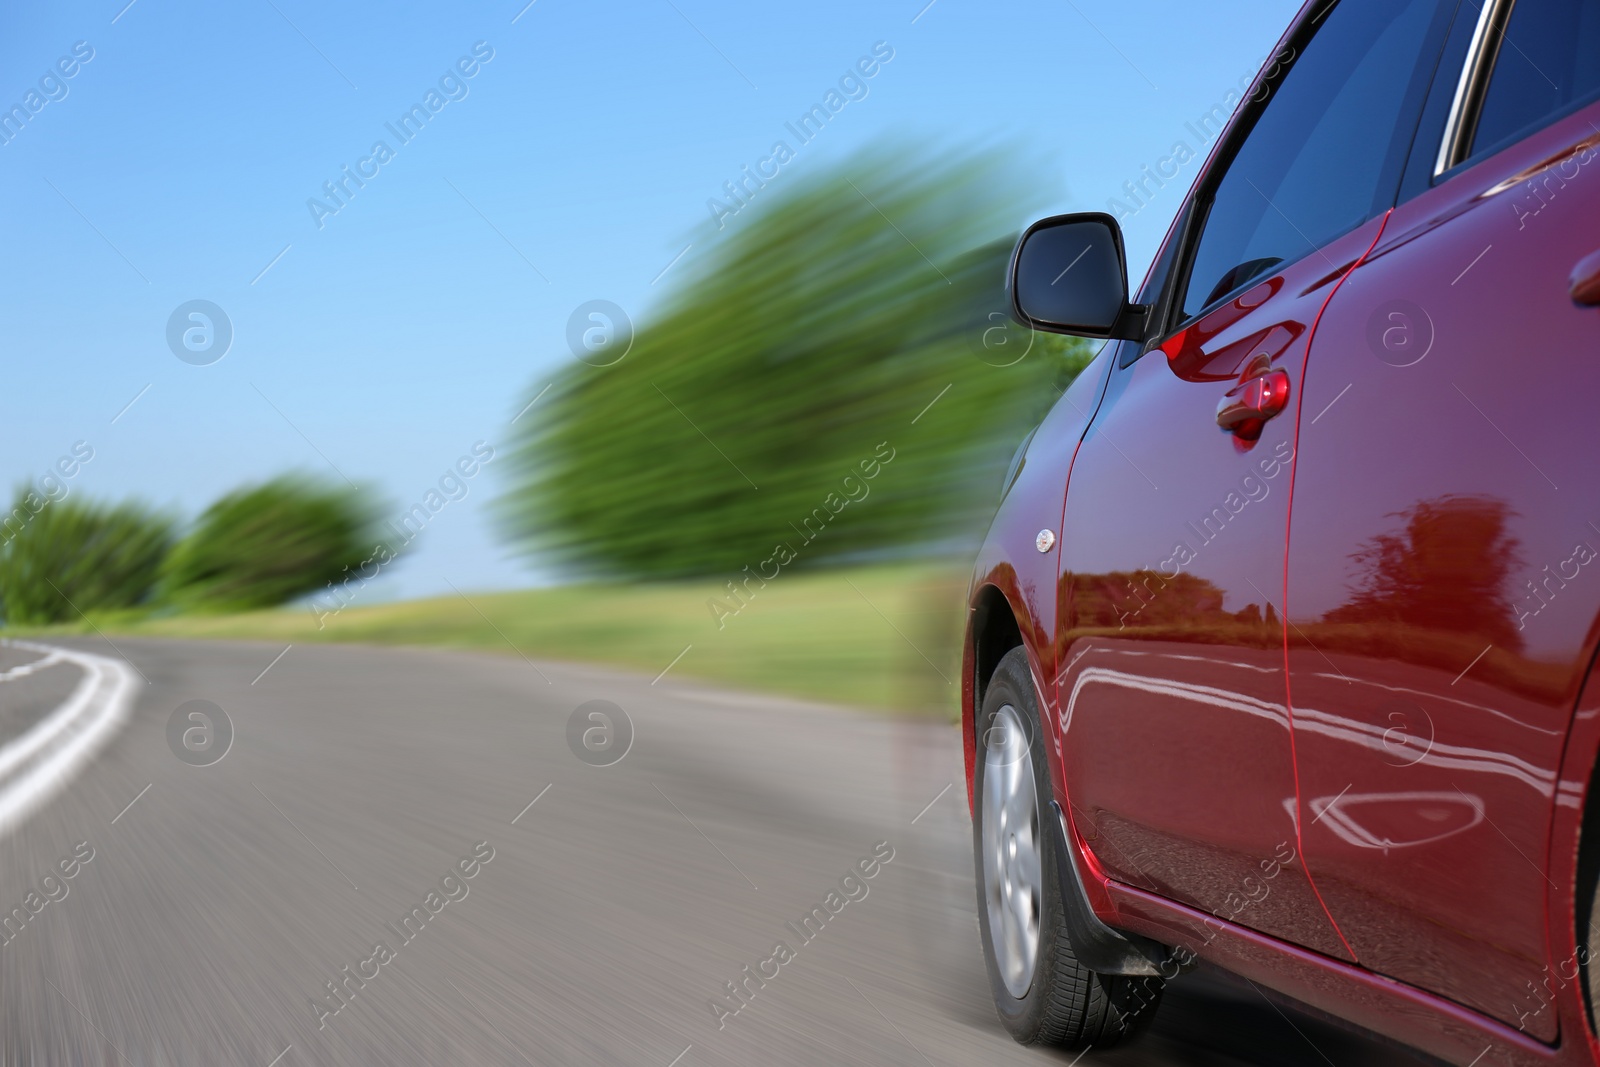 Image of Red car driving at high speed on asphalt road outdoors, closeup with motion blur effect. Space for text